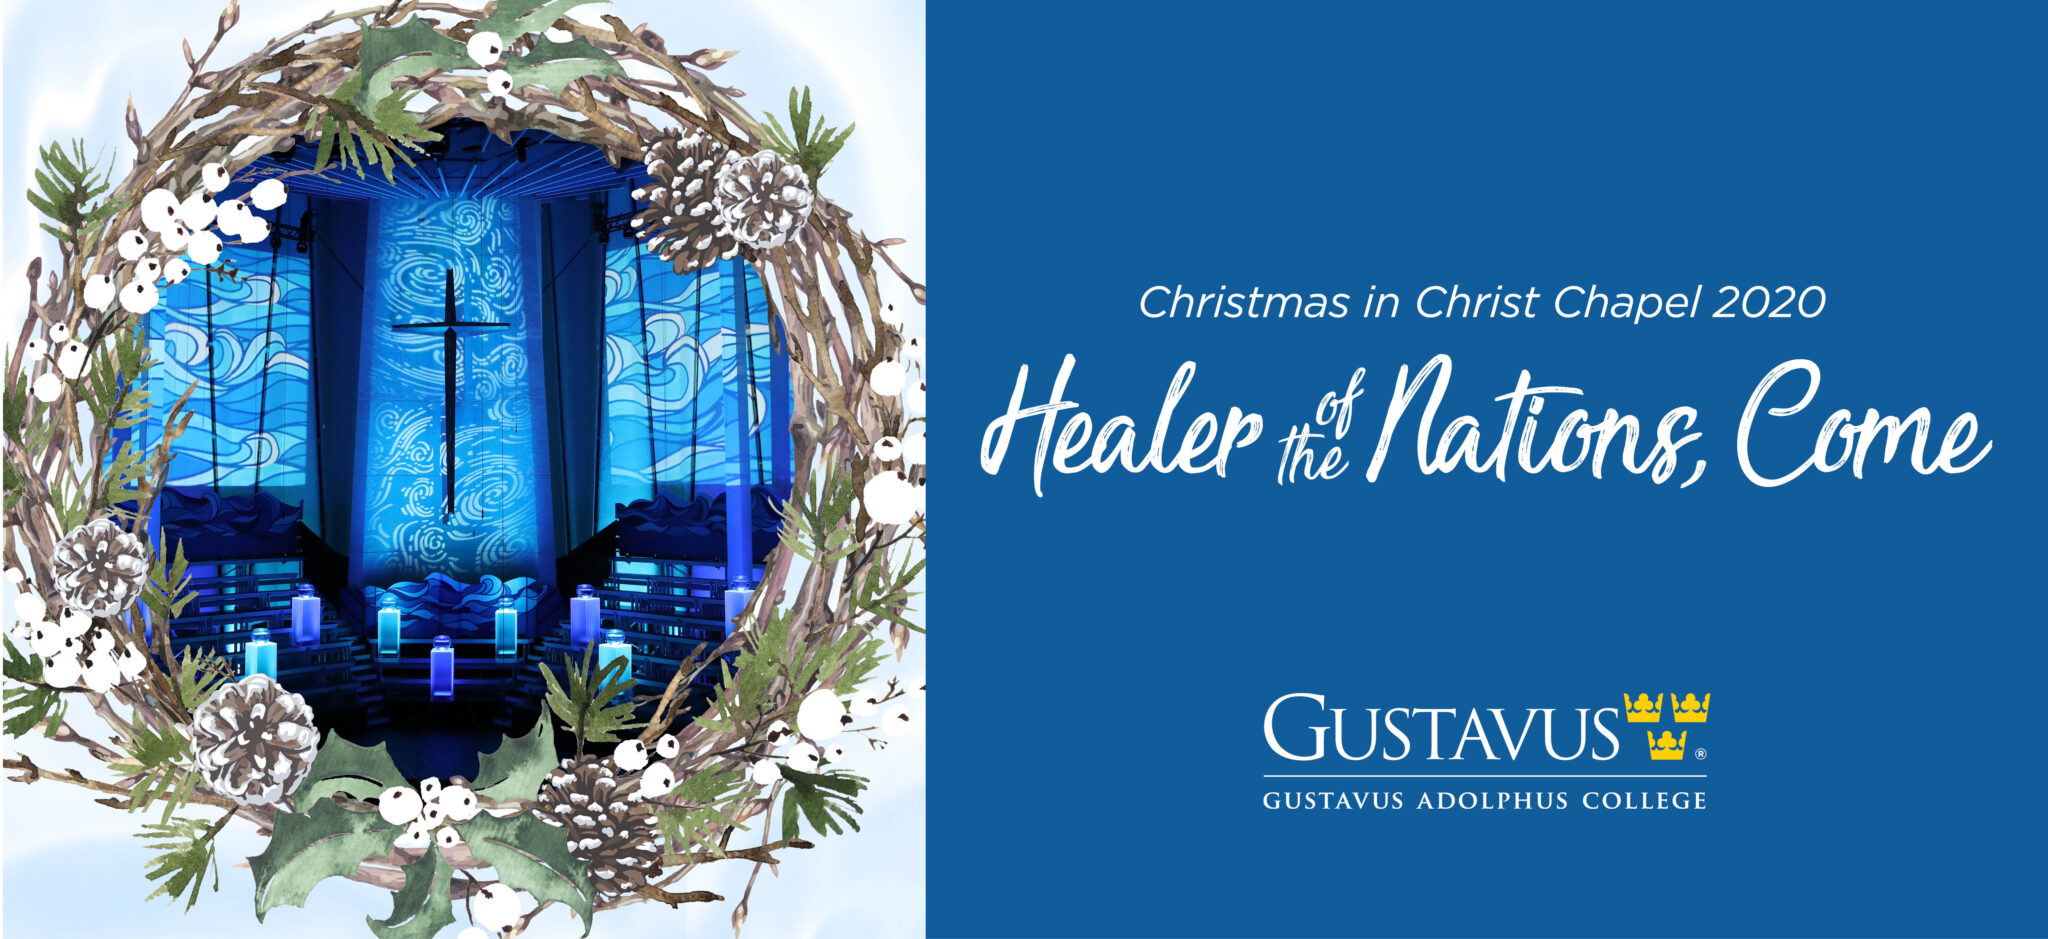 Christmas (in Christ Chapel) Comes Early On December 19, Gusties and